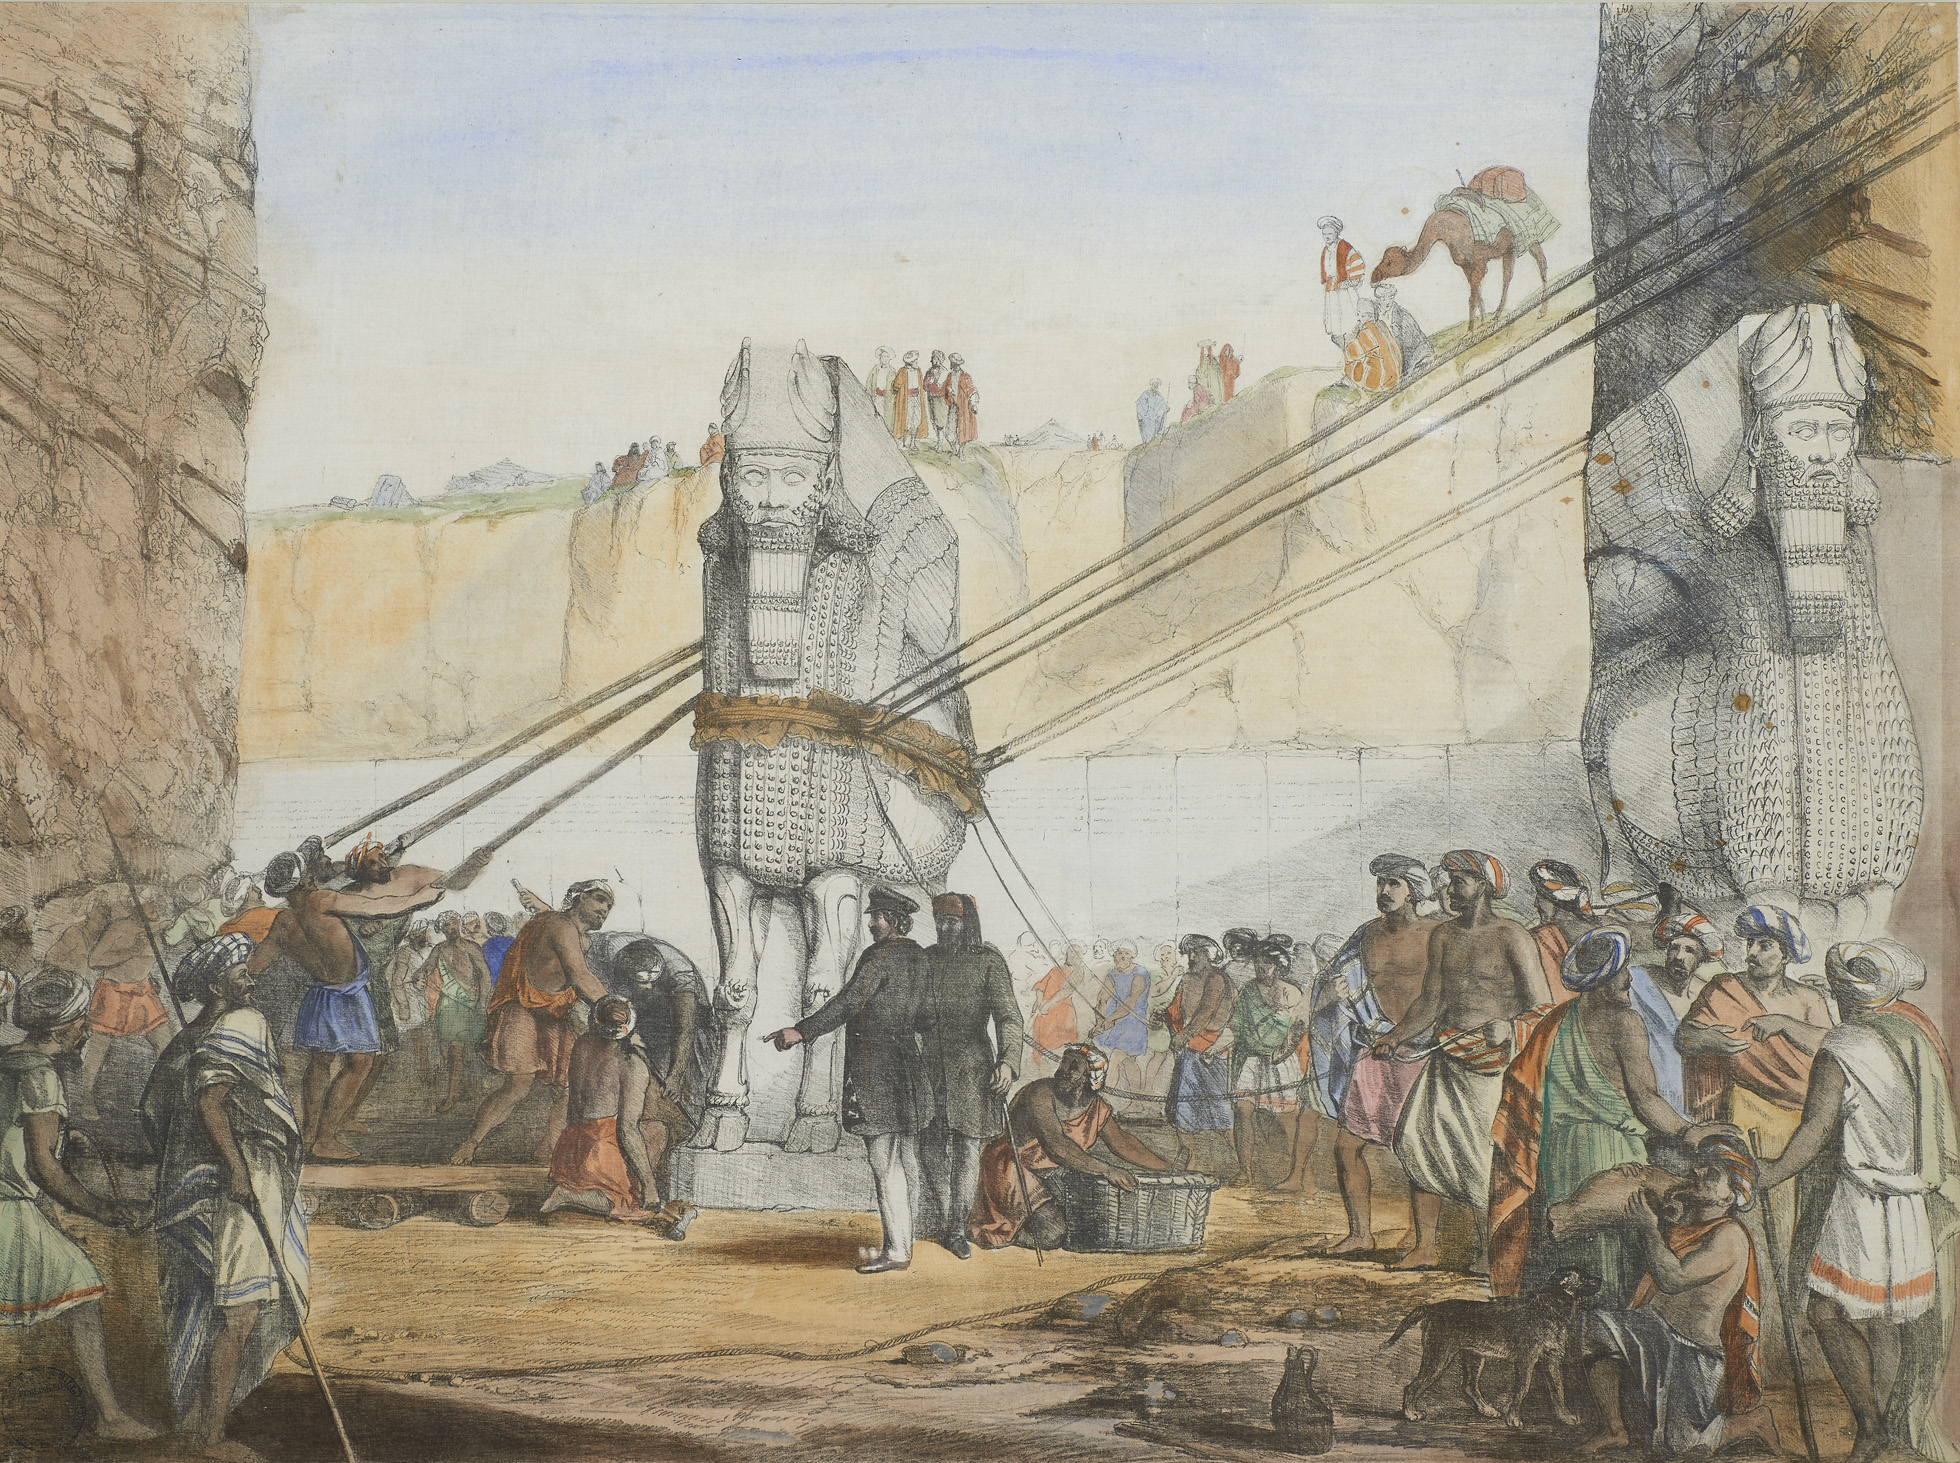 possibly-george-scharf-18201895-layard-and-rassam-at-work-in-nimrud-about-185060-hand-coloured-lithograph-on-canvas